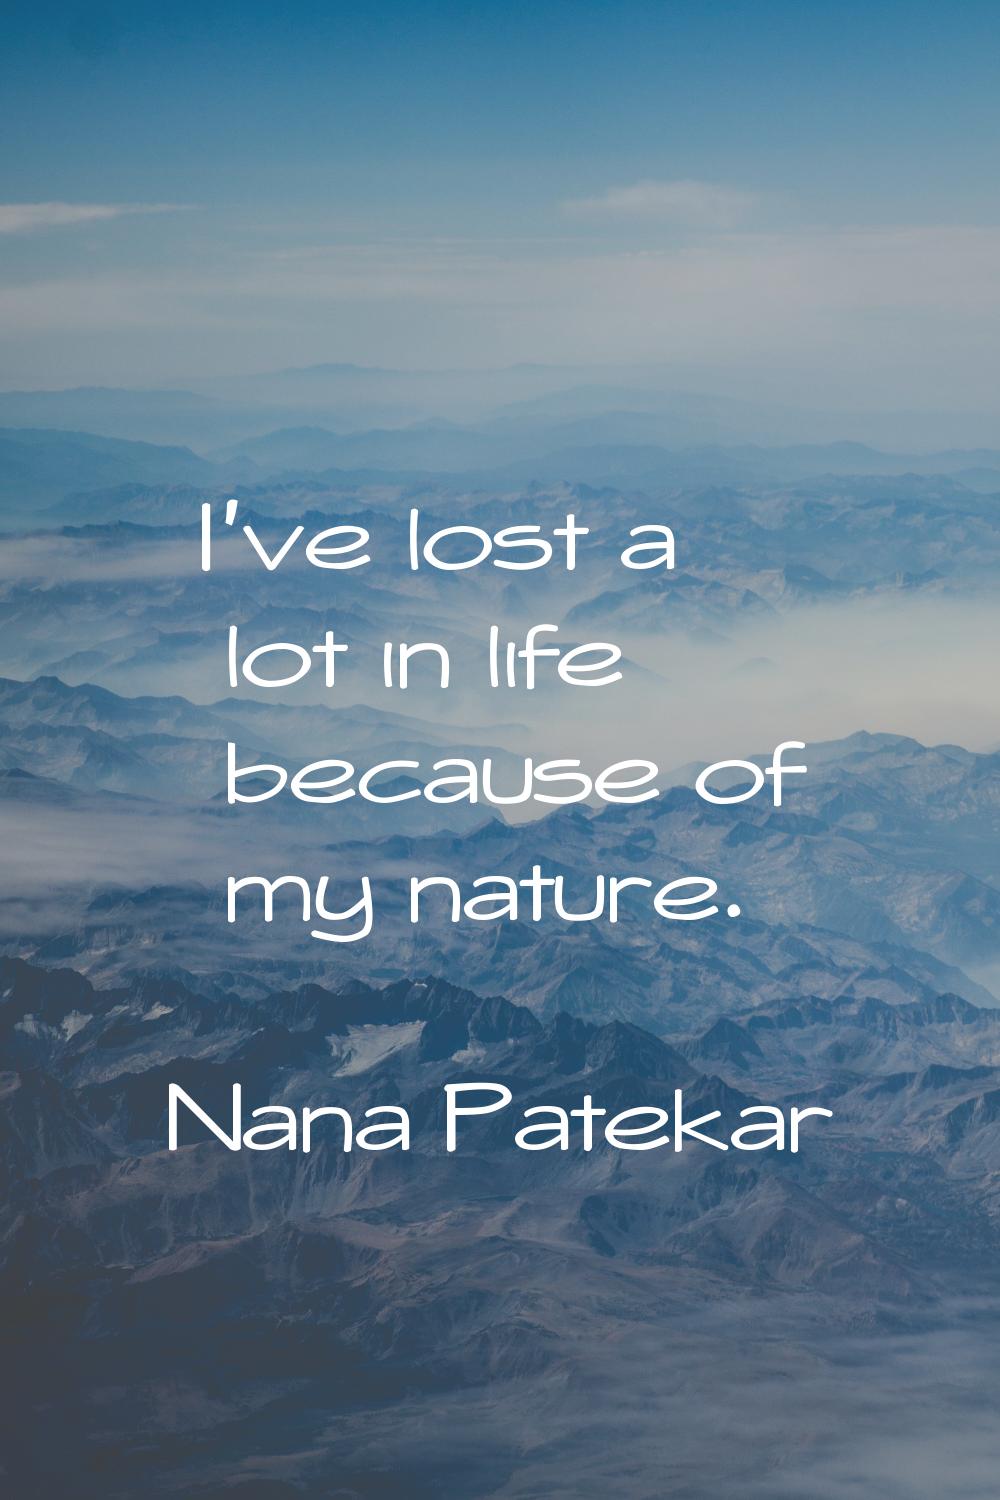 I've lost a lot in life because of my nature.